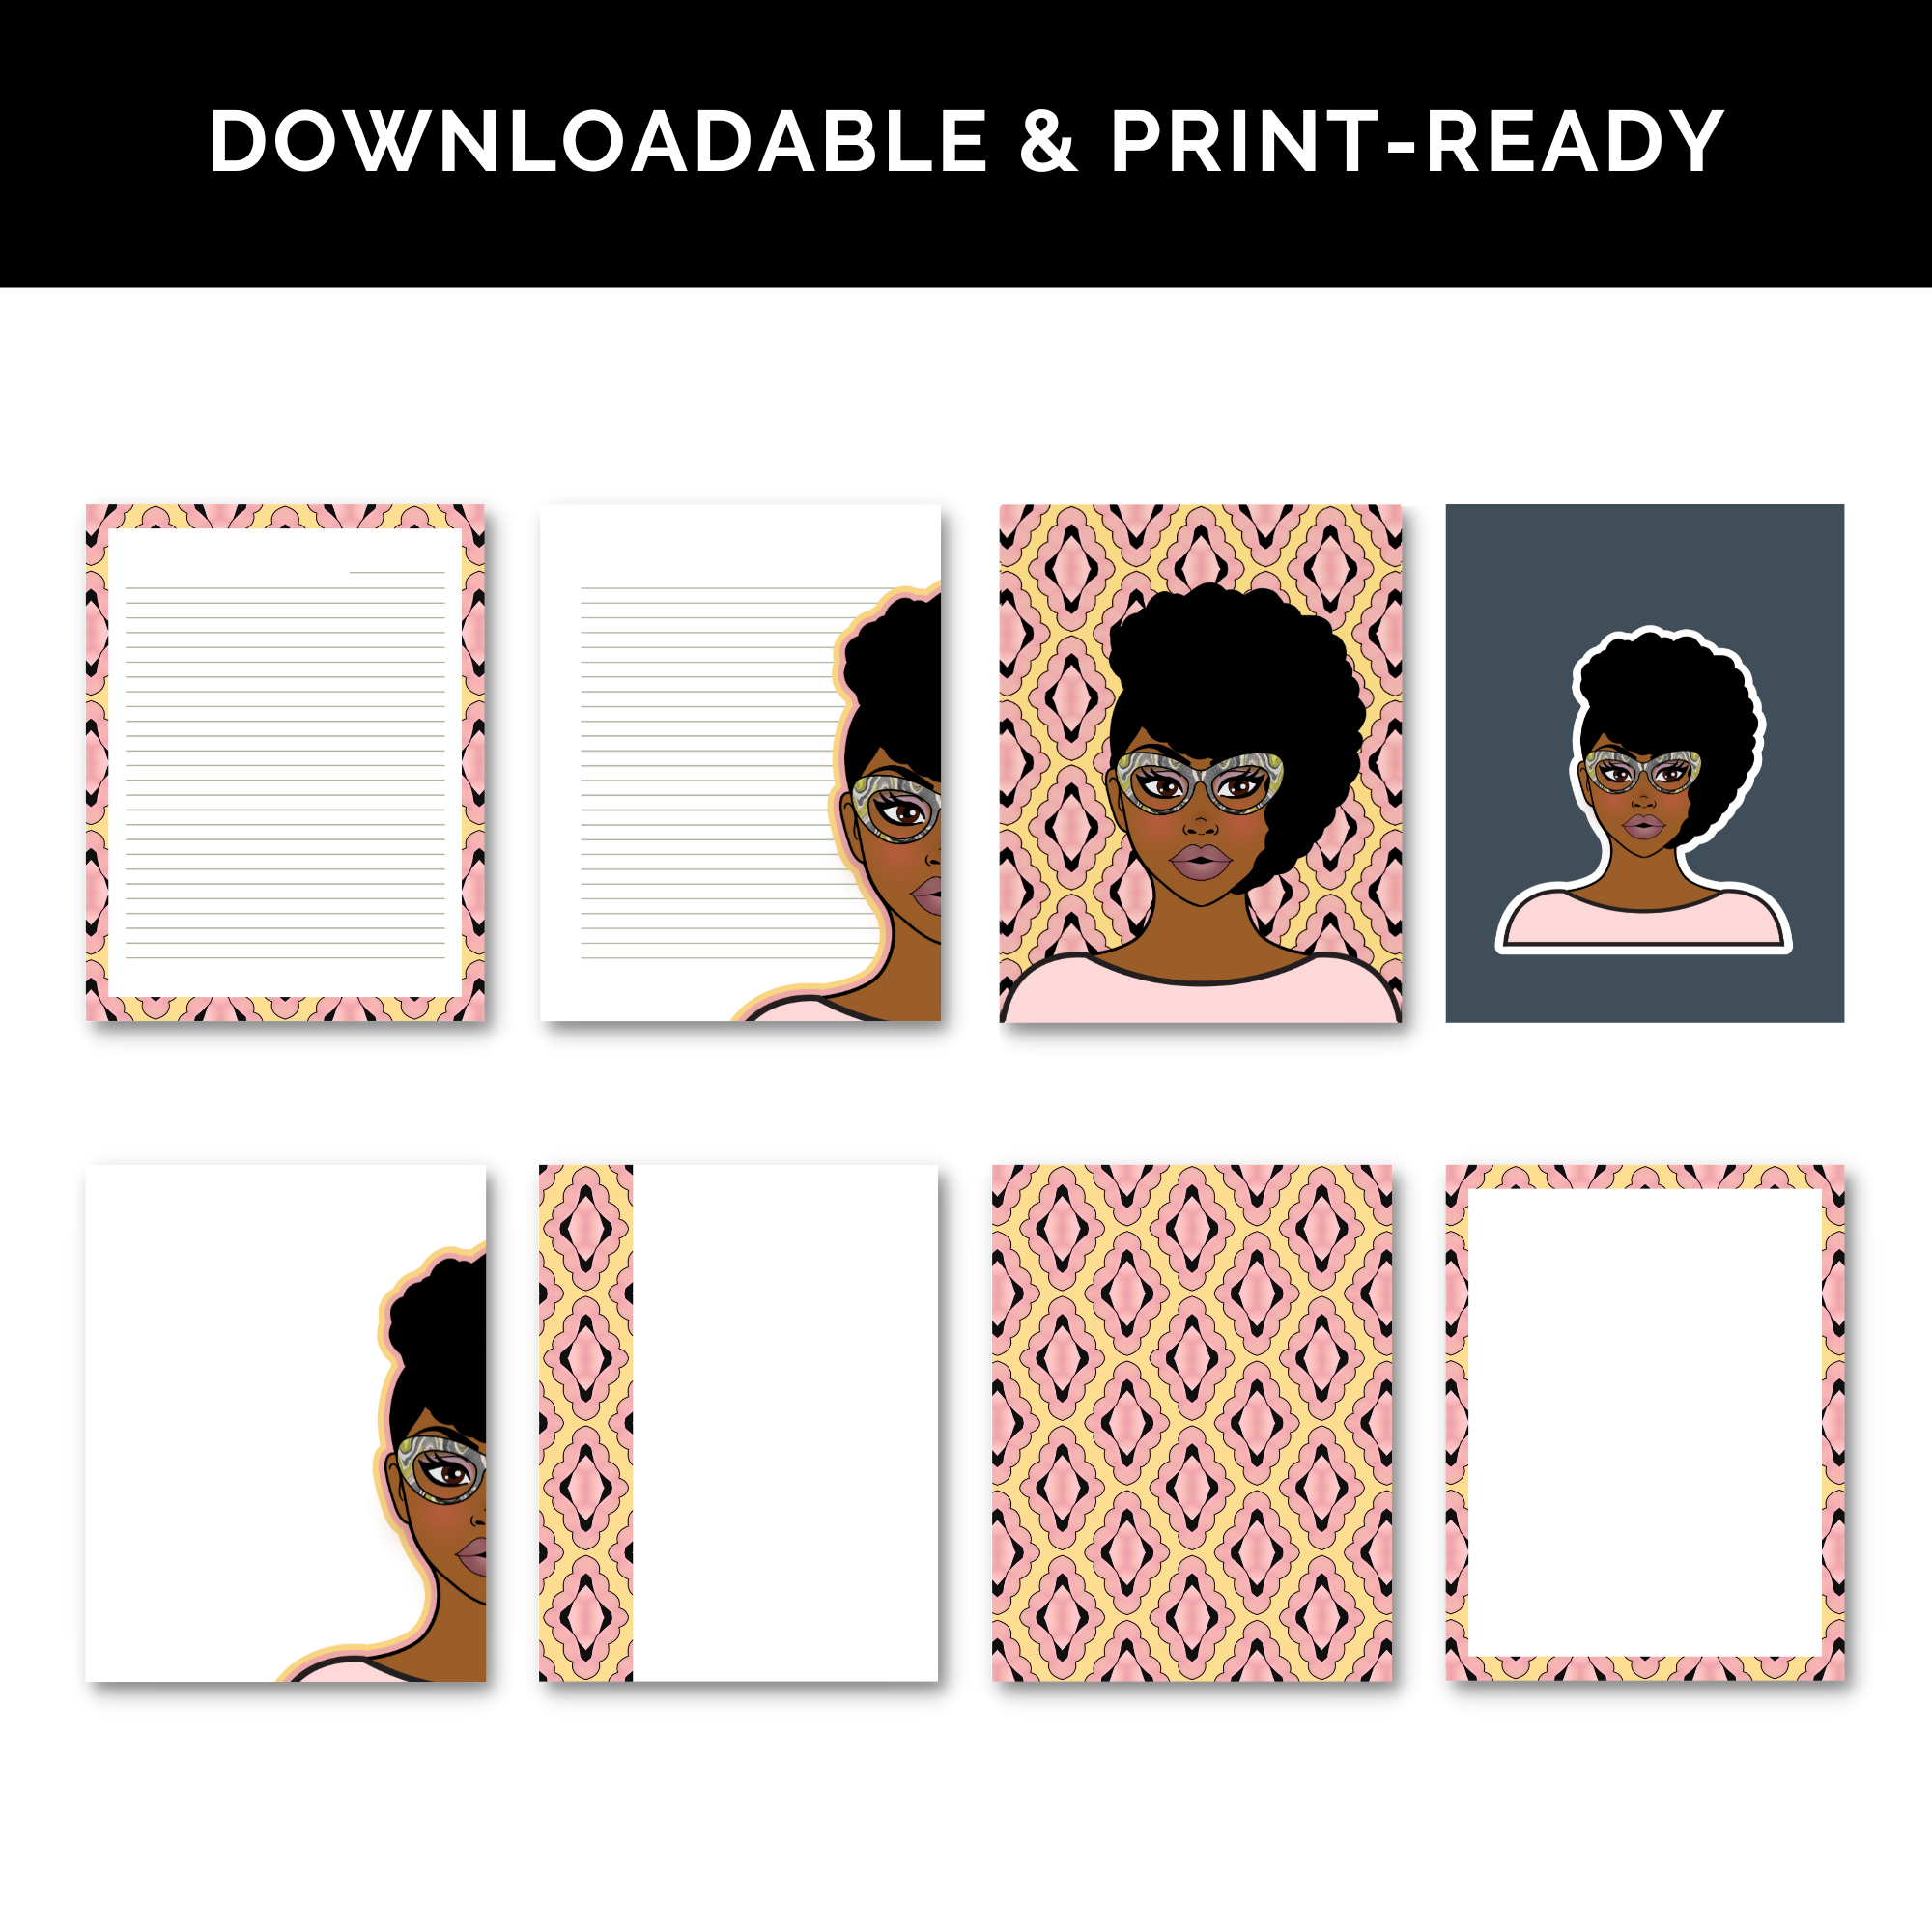 Digital & Printable Stationery Set, Planner/Journal Pages | Instant Download, Pink Yellow Arabesque Print - Dk African American | GoodNotes